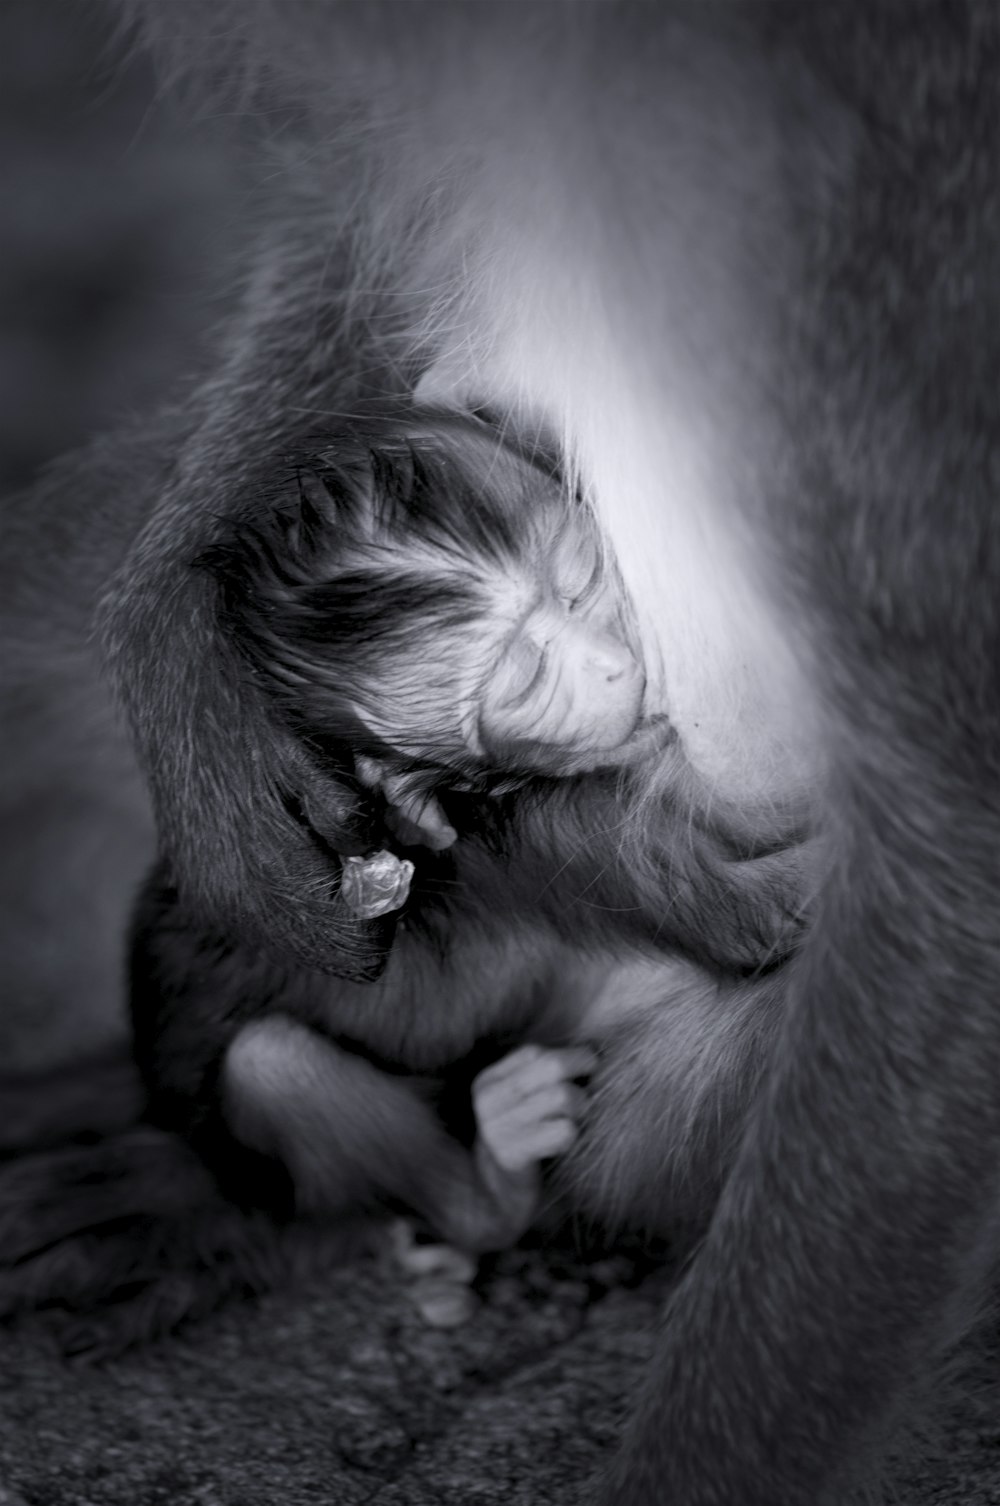 a baby monkey is curled up in its mother's arms